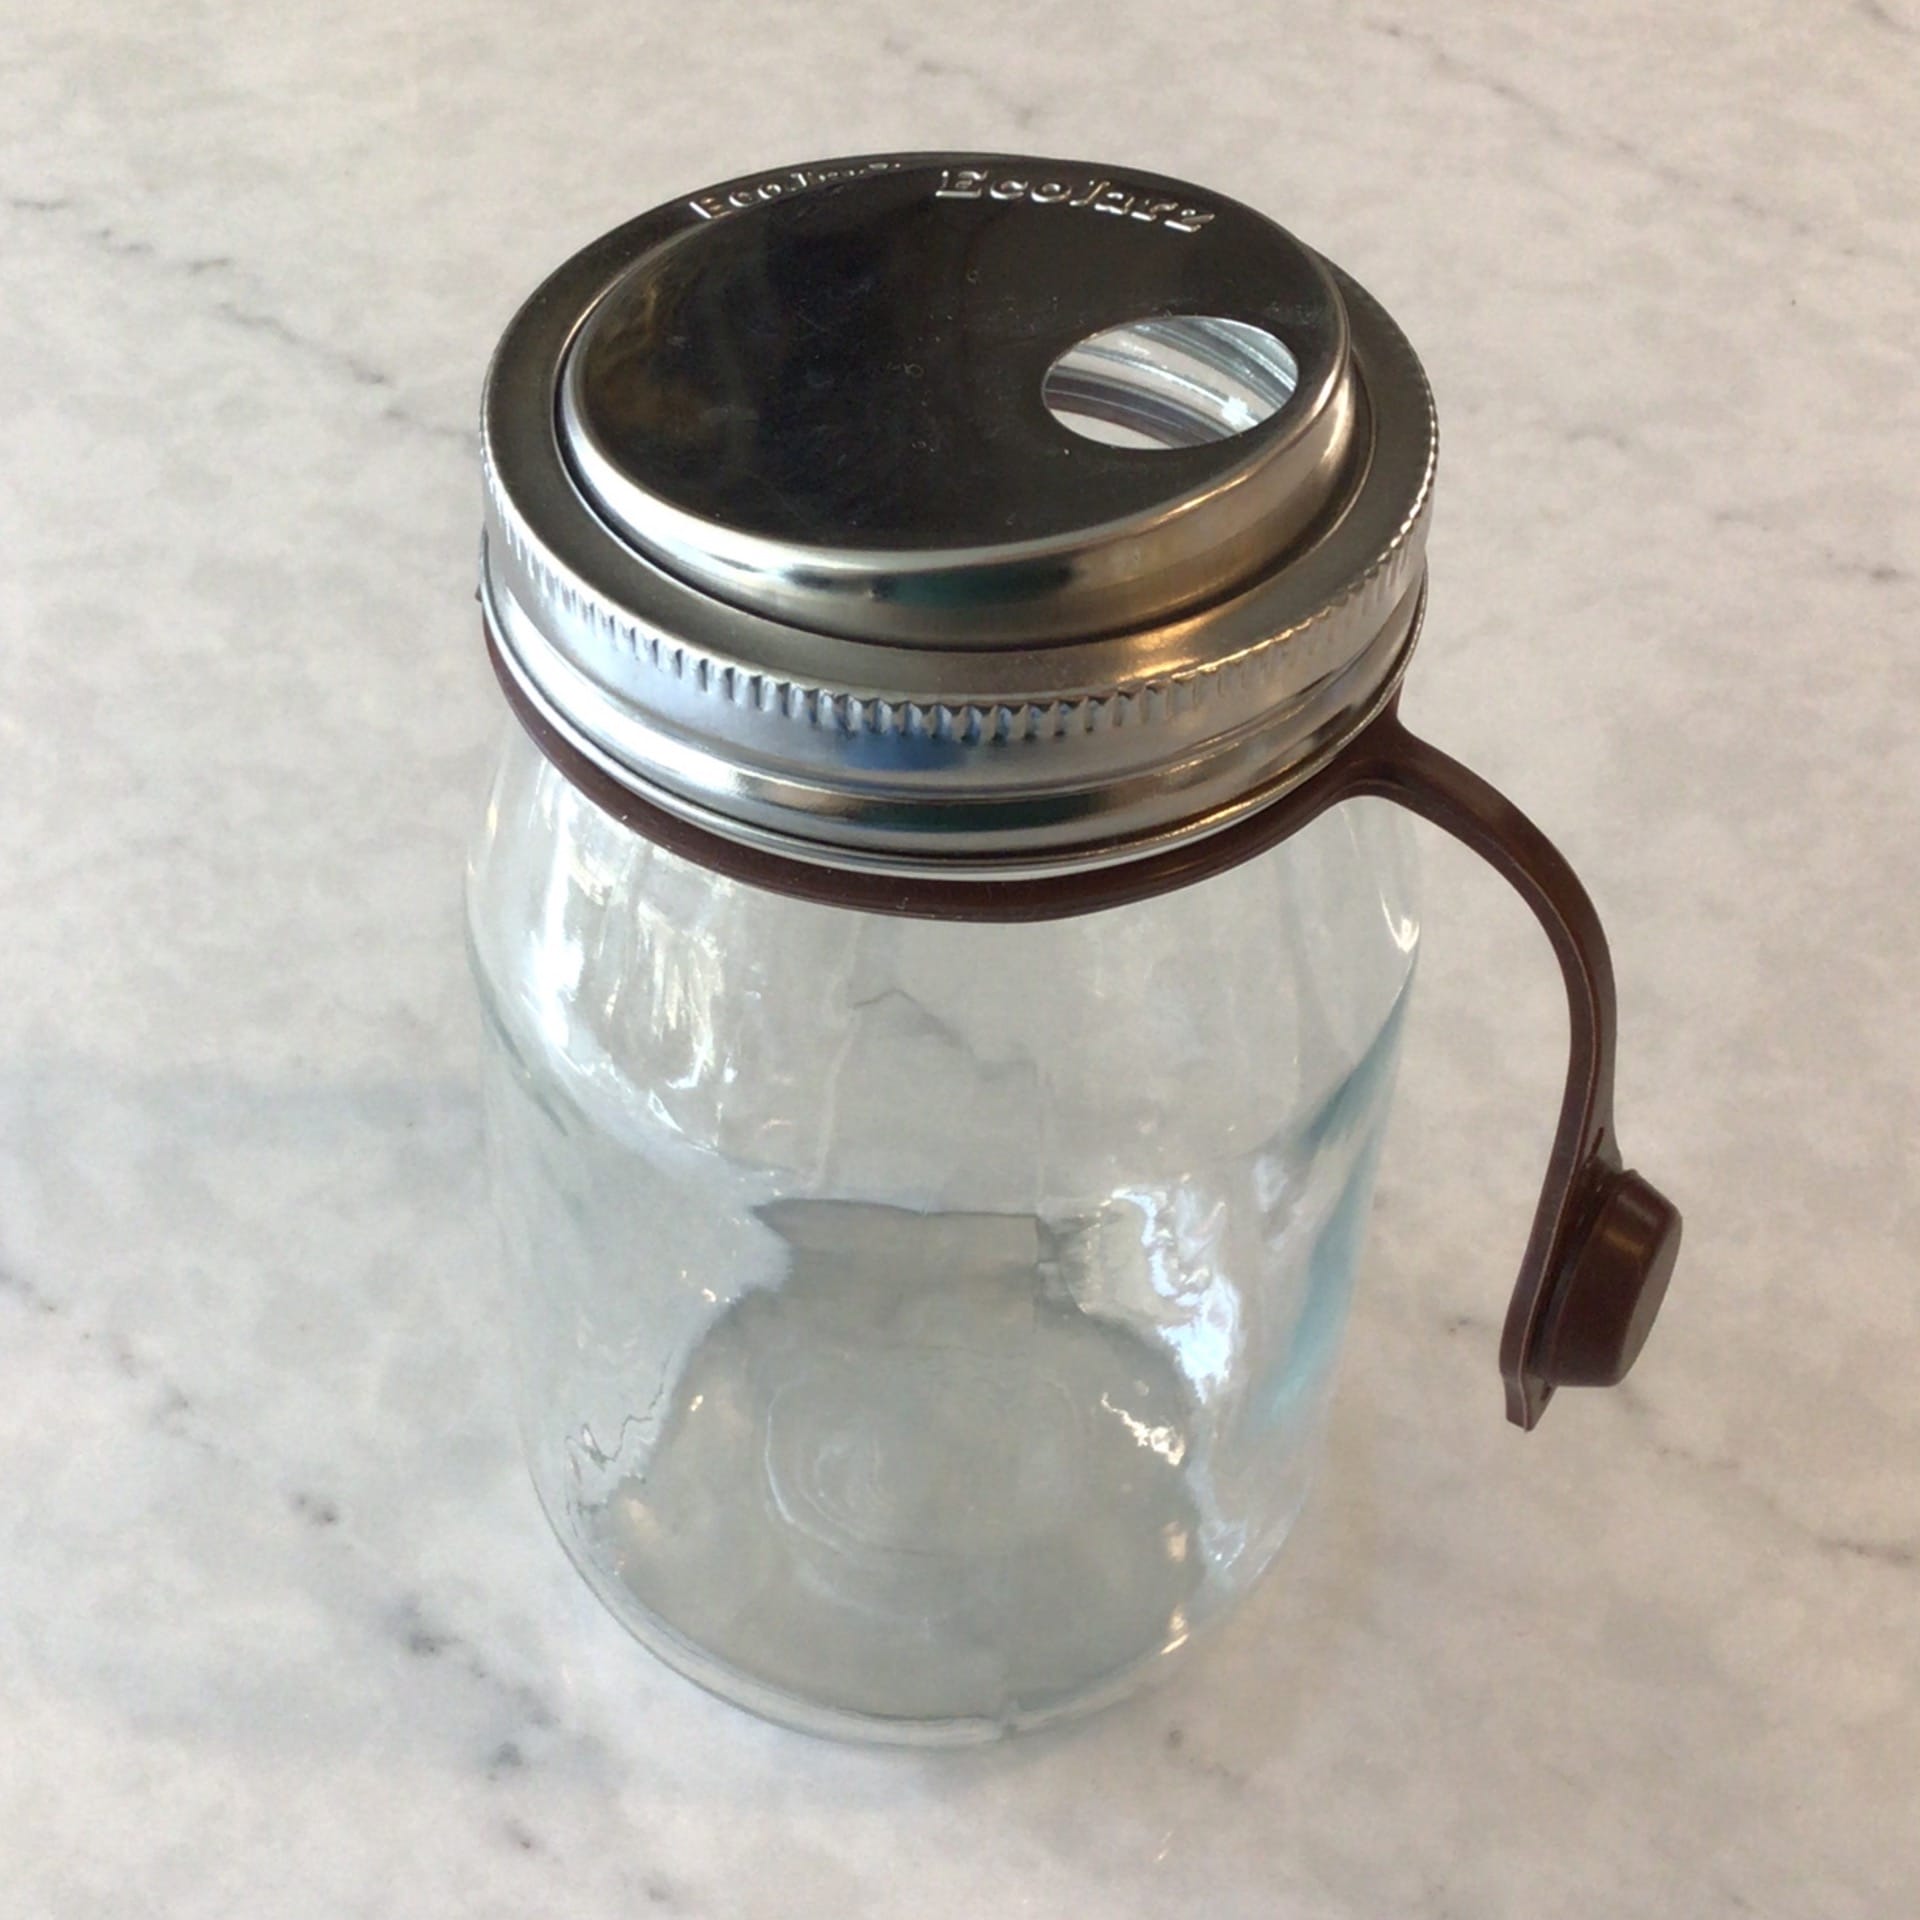 https://ex9gmccx2pn.exactdn.com/wp-content/uploads/2023/02/ecojarz-stainless-steel-wide-mouth-drinking-lid-with-pop-top.jpeg?strip=all&lossy=1&ssl=1